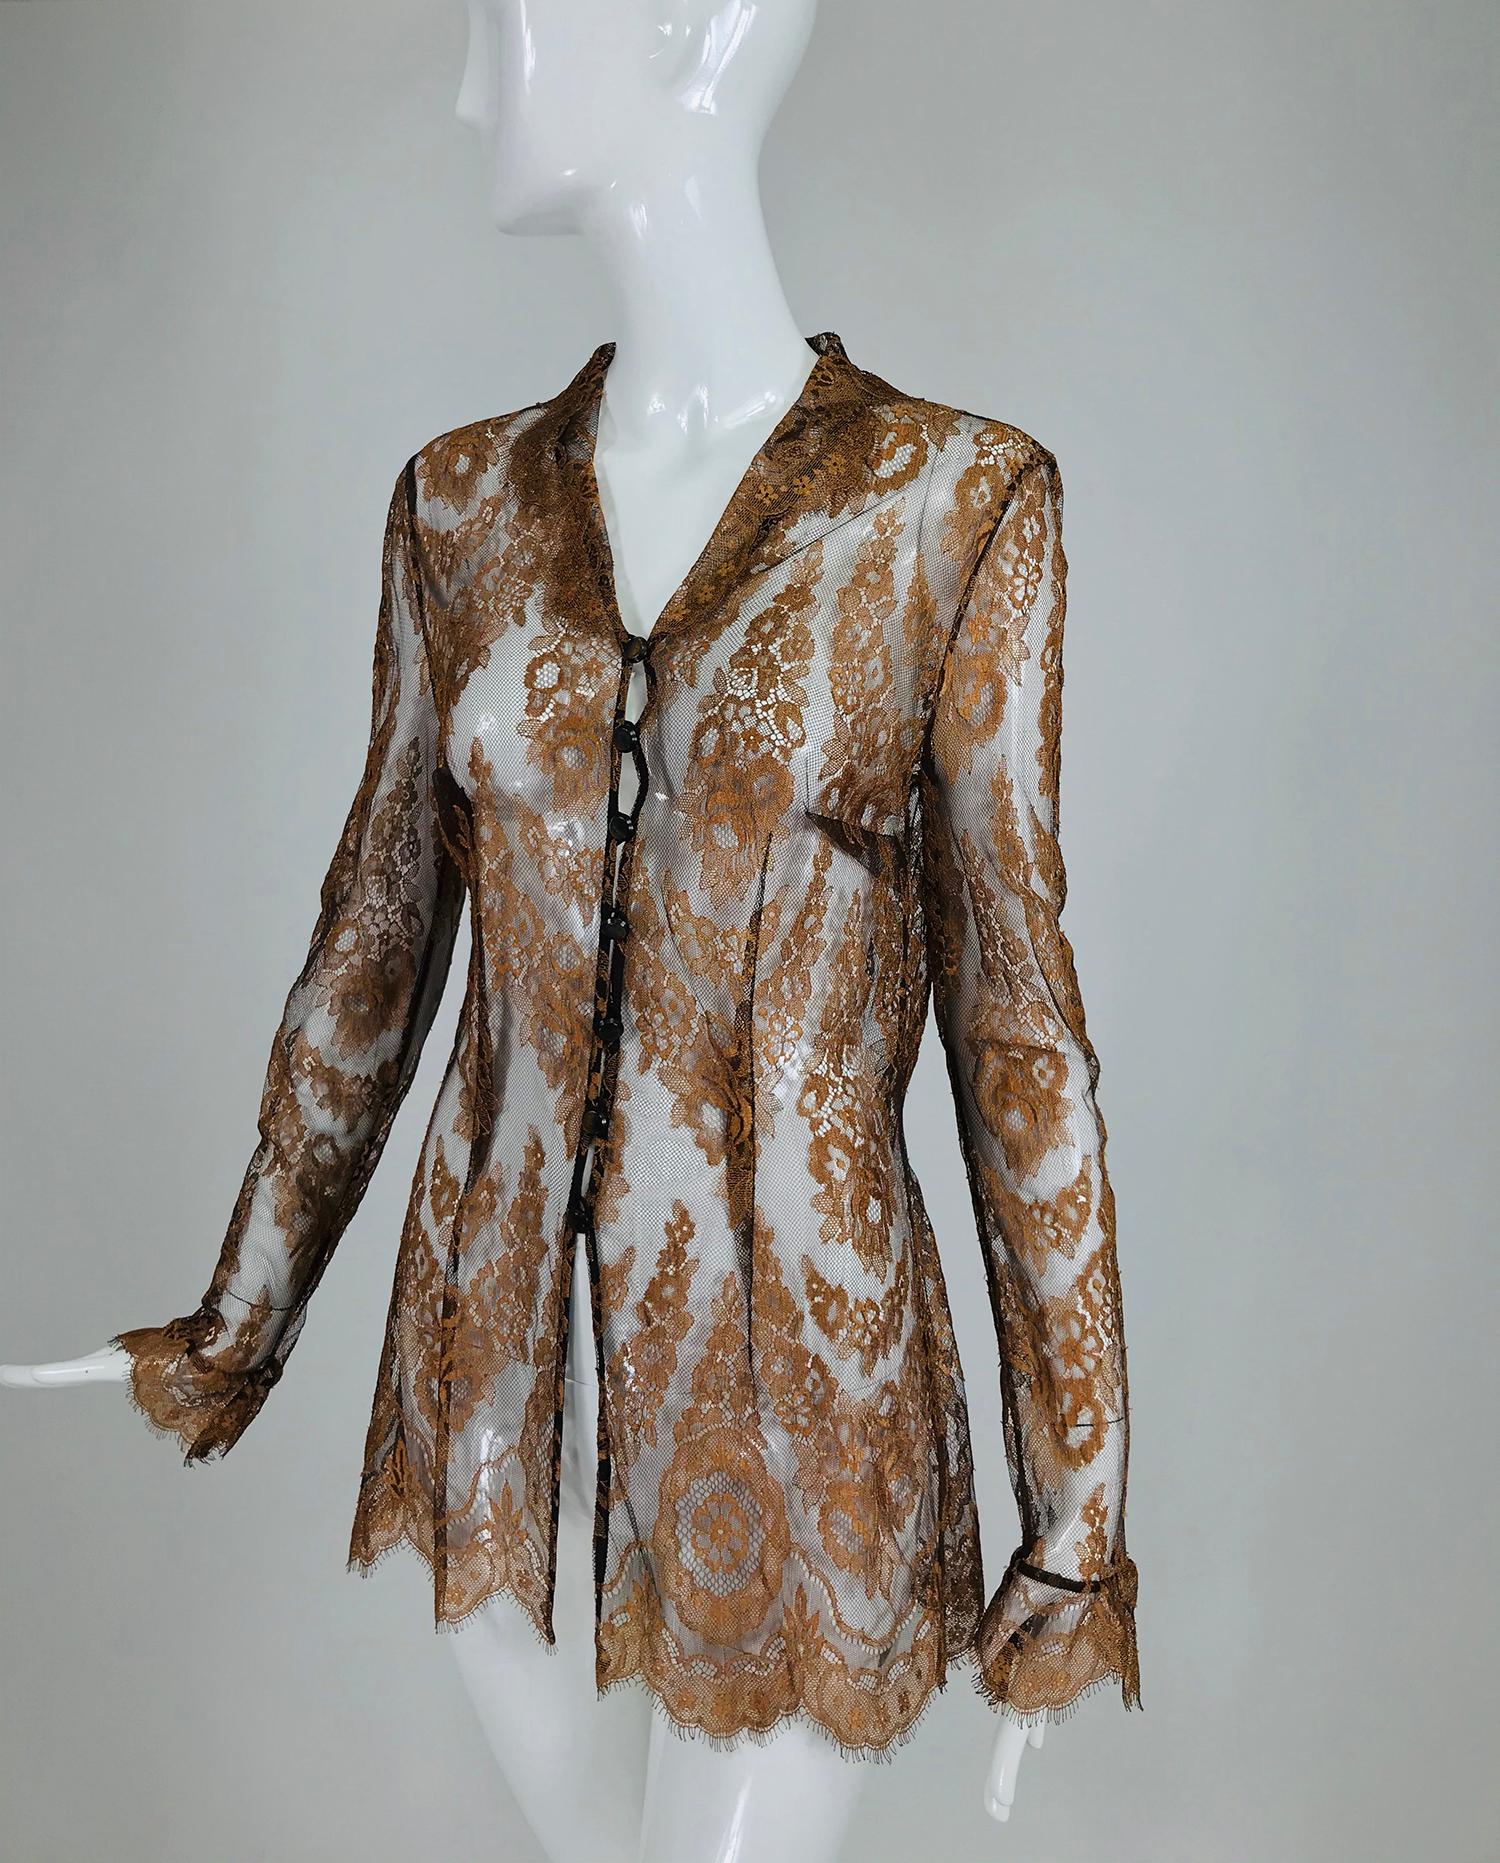 Escada russet lace long sleeve blouse. This beautiful blouse is sheer and unlined. Button front blouse, closes with loops and buttons, there is a collar, the neckline is a V. The torso is long and semi fitted. Long sleeves have ribbon band at wrist